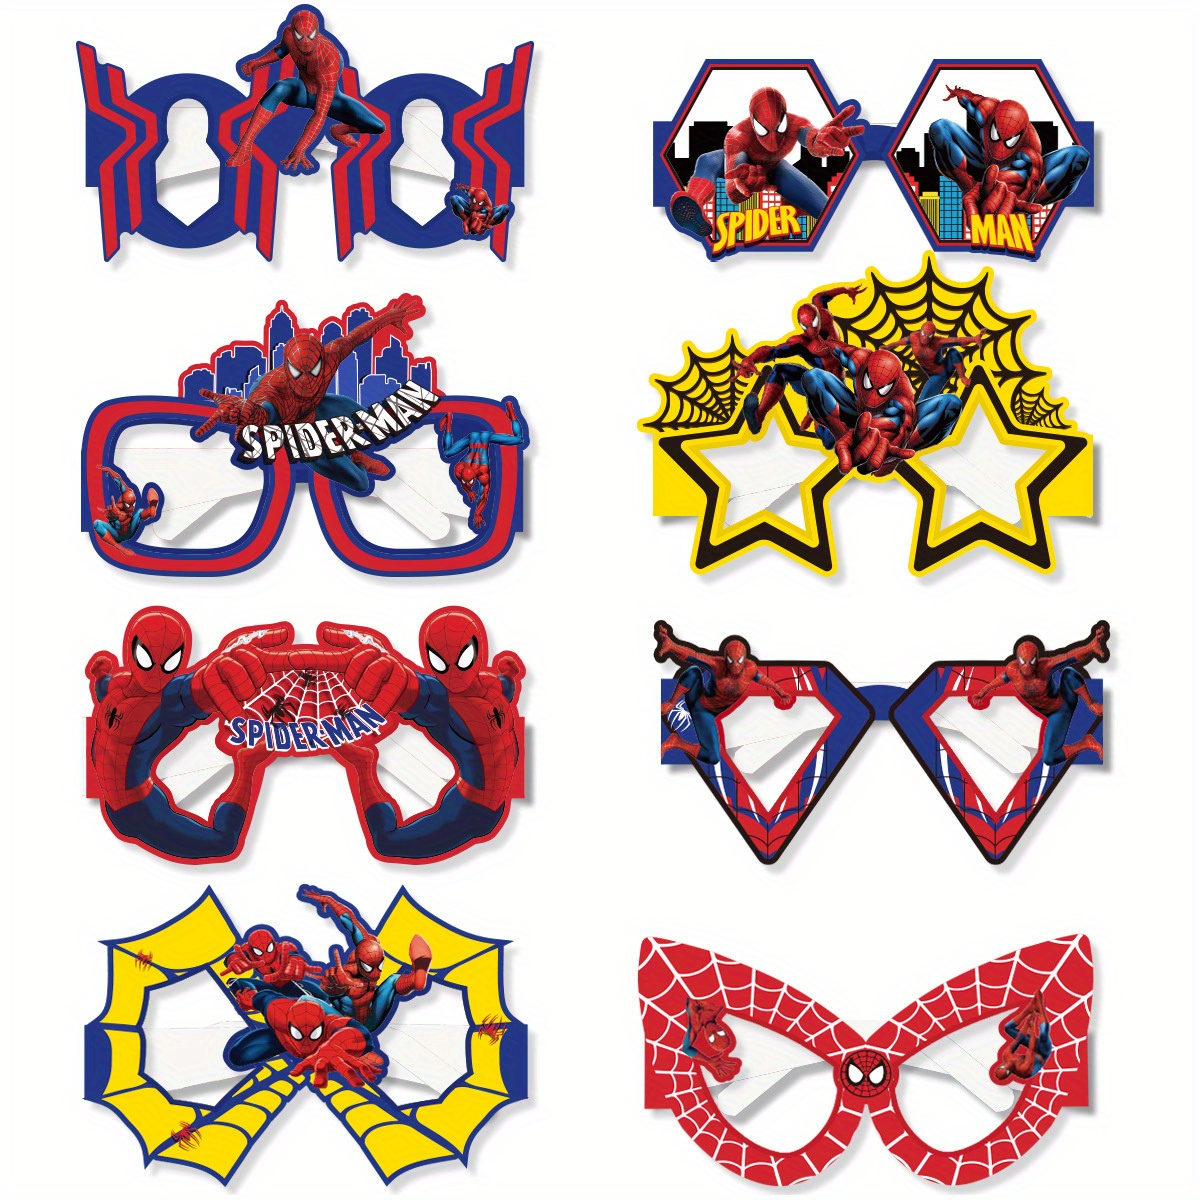 

Licensed 8pcs Spider-man Party Photo Booth Props Paper Glasses, Hero Themed Birthday Eyewear Decorations, Craft Supplies By Ume